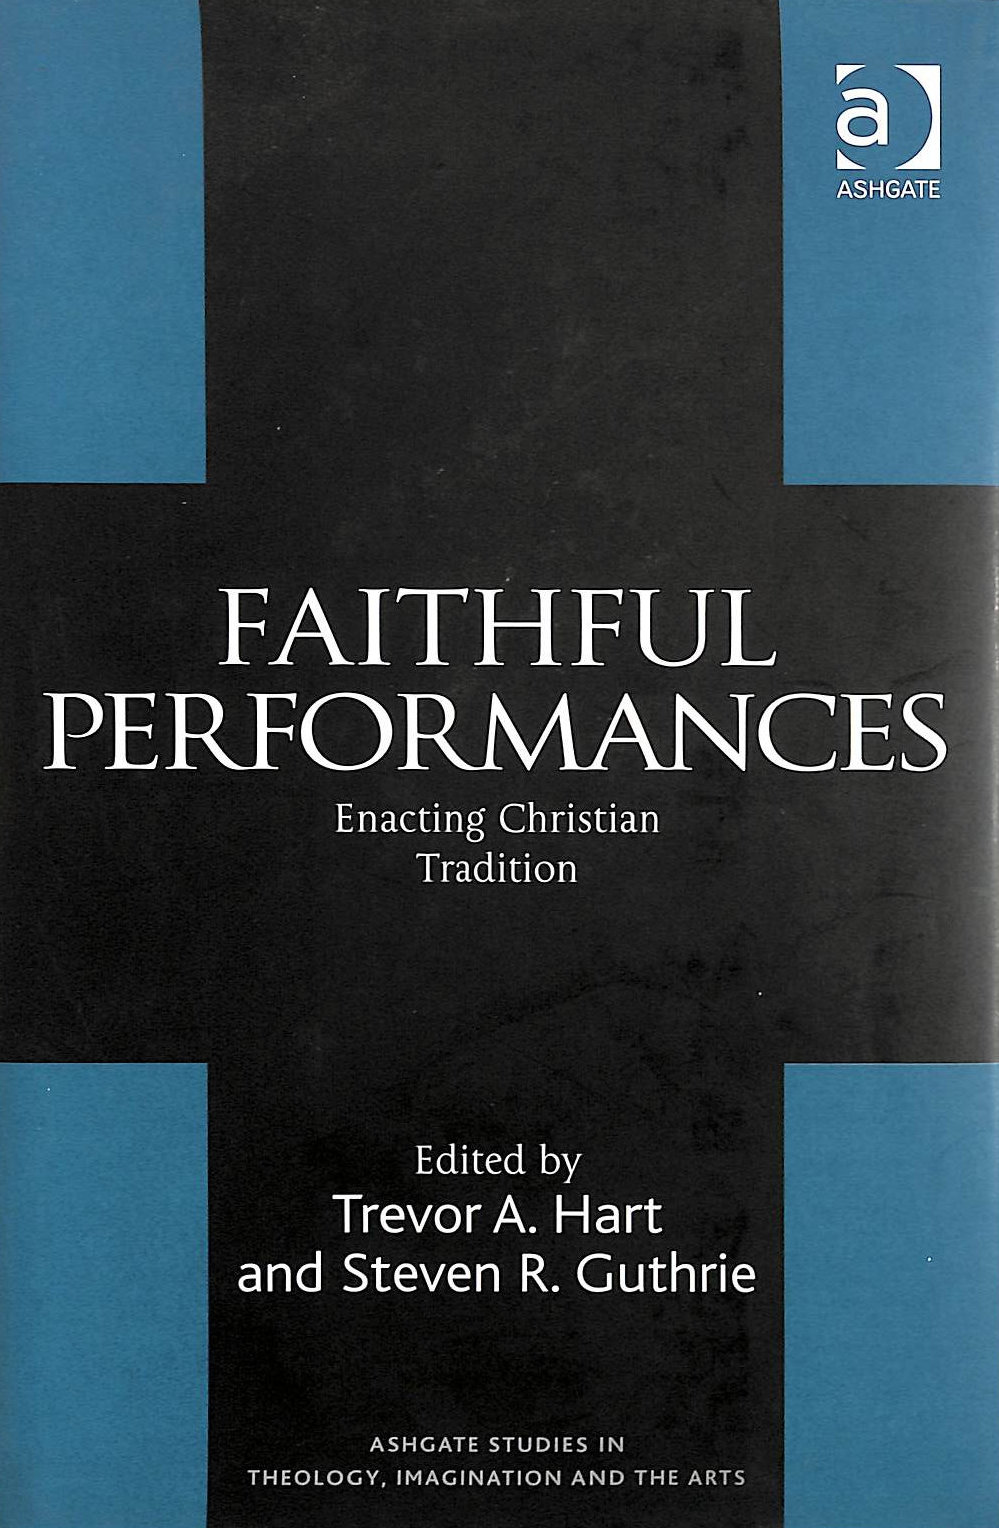 TREVOR A. HART [EDITOR]; STEVEN R. GUTHRIE [EDITOR]; JEREMY BEGBIE [COLLABORATOR]; IVAN KHOVACS [COLLABORATOR]; BEN QUASH [COLLABORATOR]; - Faithful Performances: Enacting Christian Tradition (Routledge Studies in Theology, Imagination and the Arts)